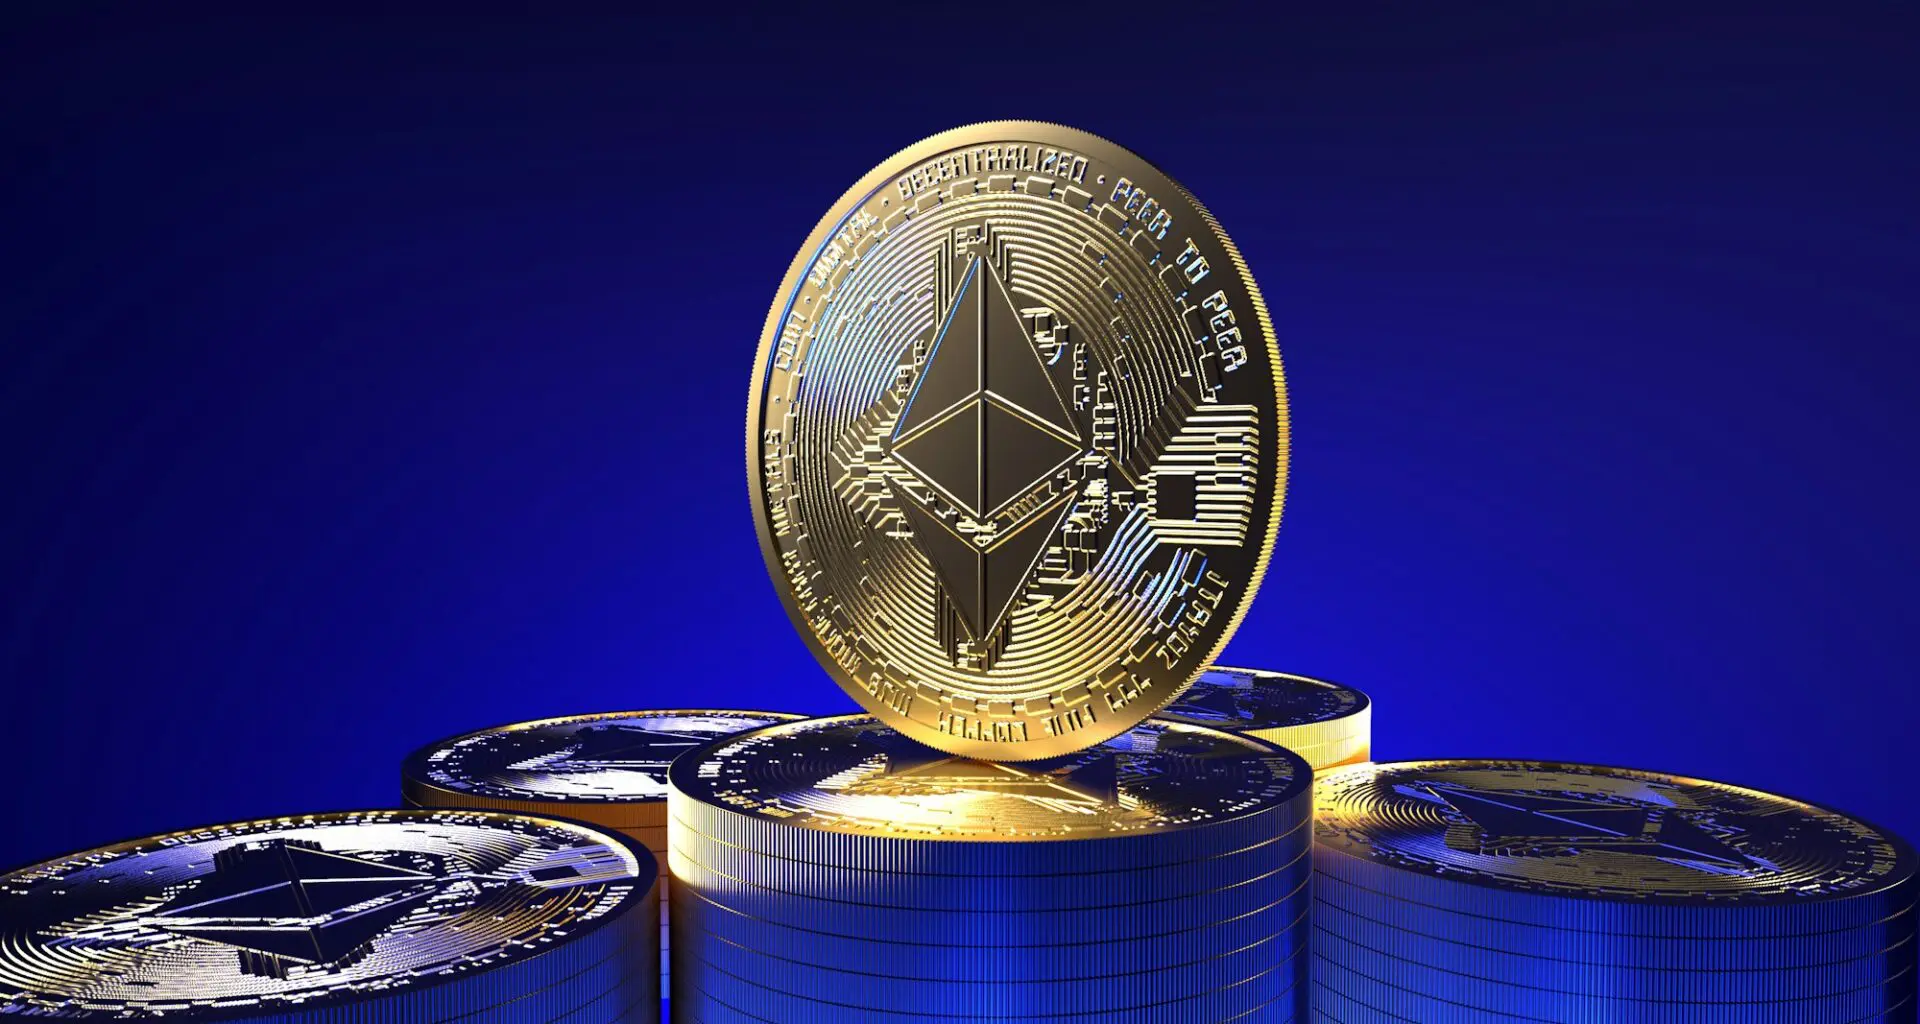 Closeup of the Ethereum cryptocurrency on dark blue background.